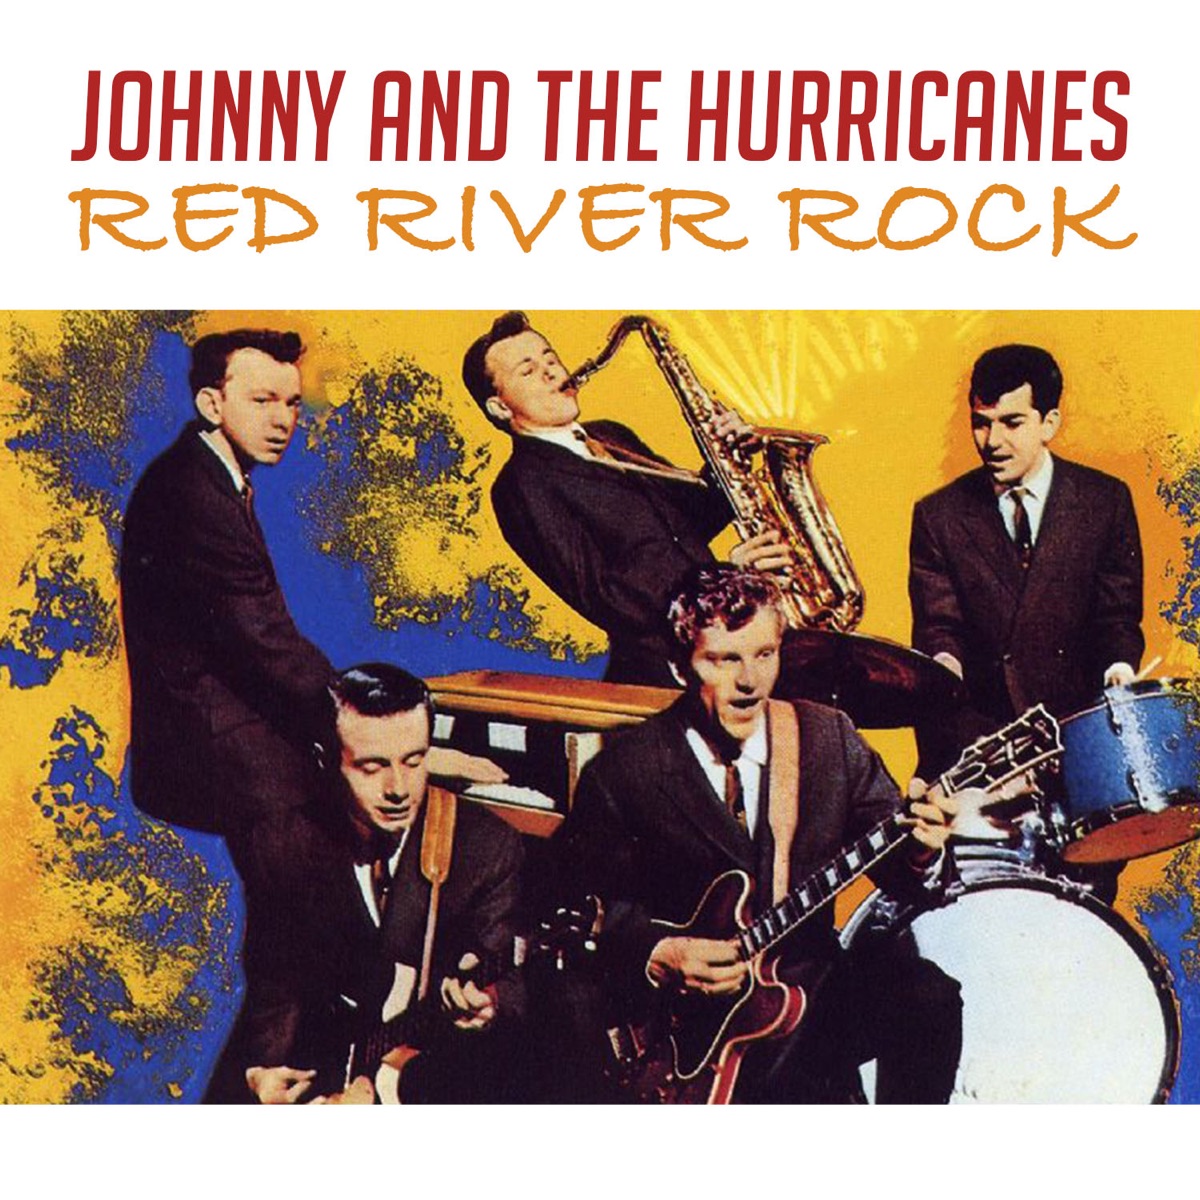 River Rock - Johnny The Hurricanes on Apple Music